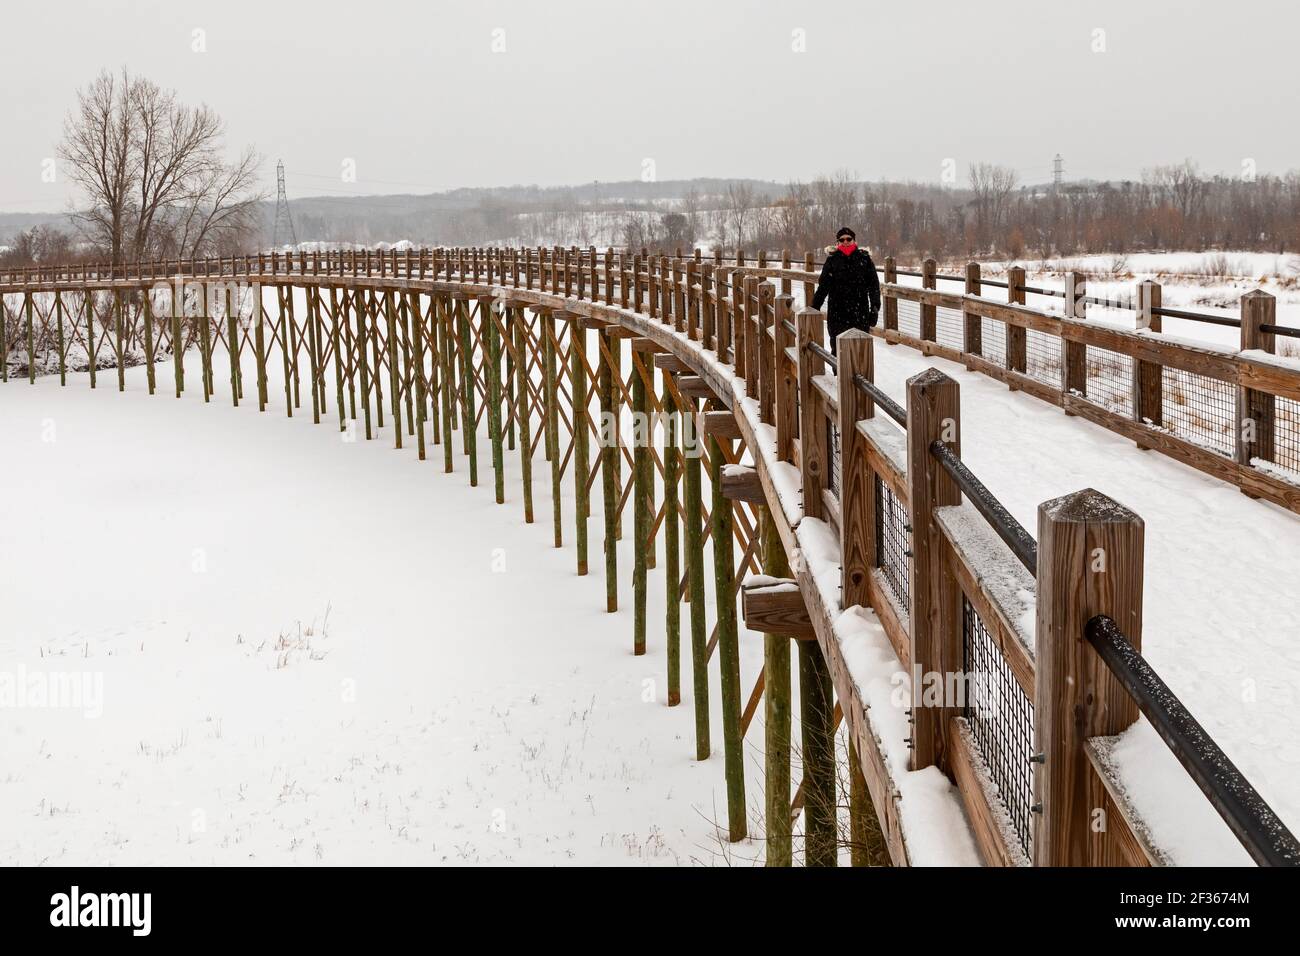 Grand Rapids, Michigan - Susan Newell, 72, walks across a bridge over a frozen lake on a winter day in Millennium Park. The 1400-acre park is one of t Stock Photo